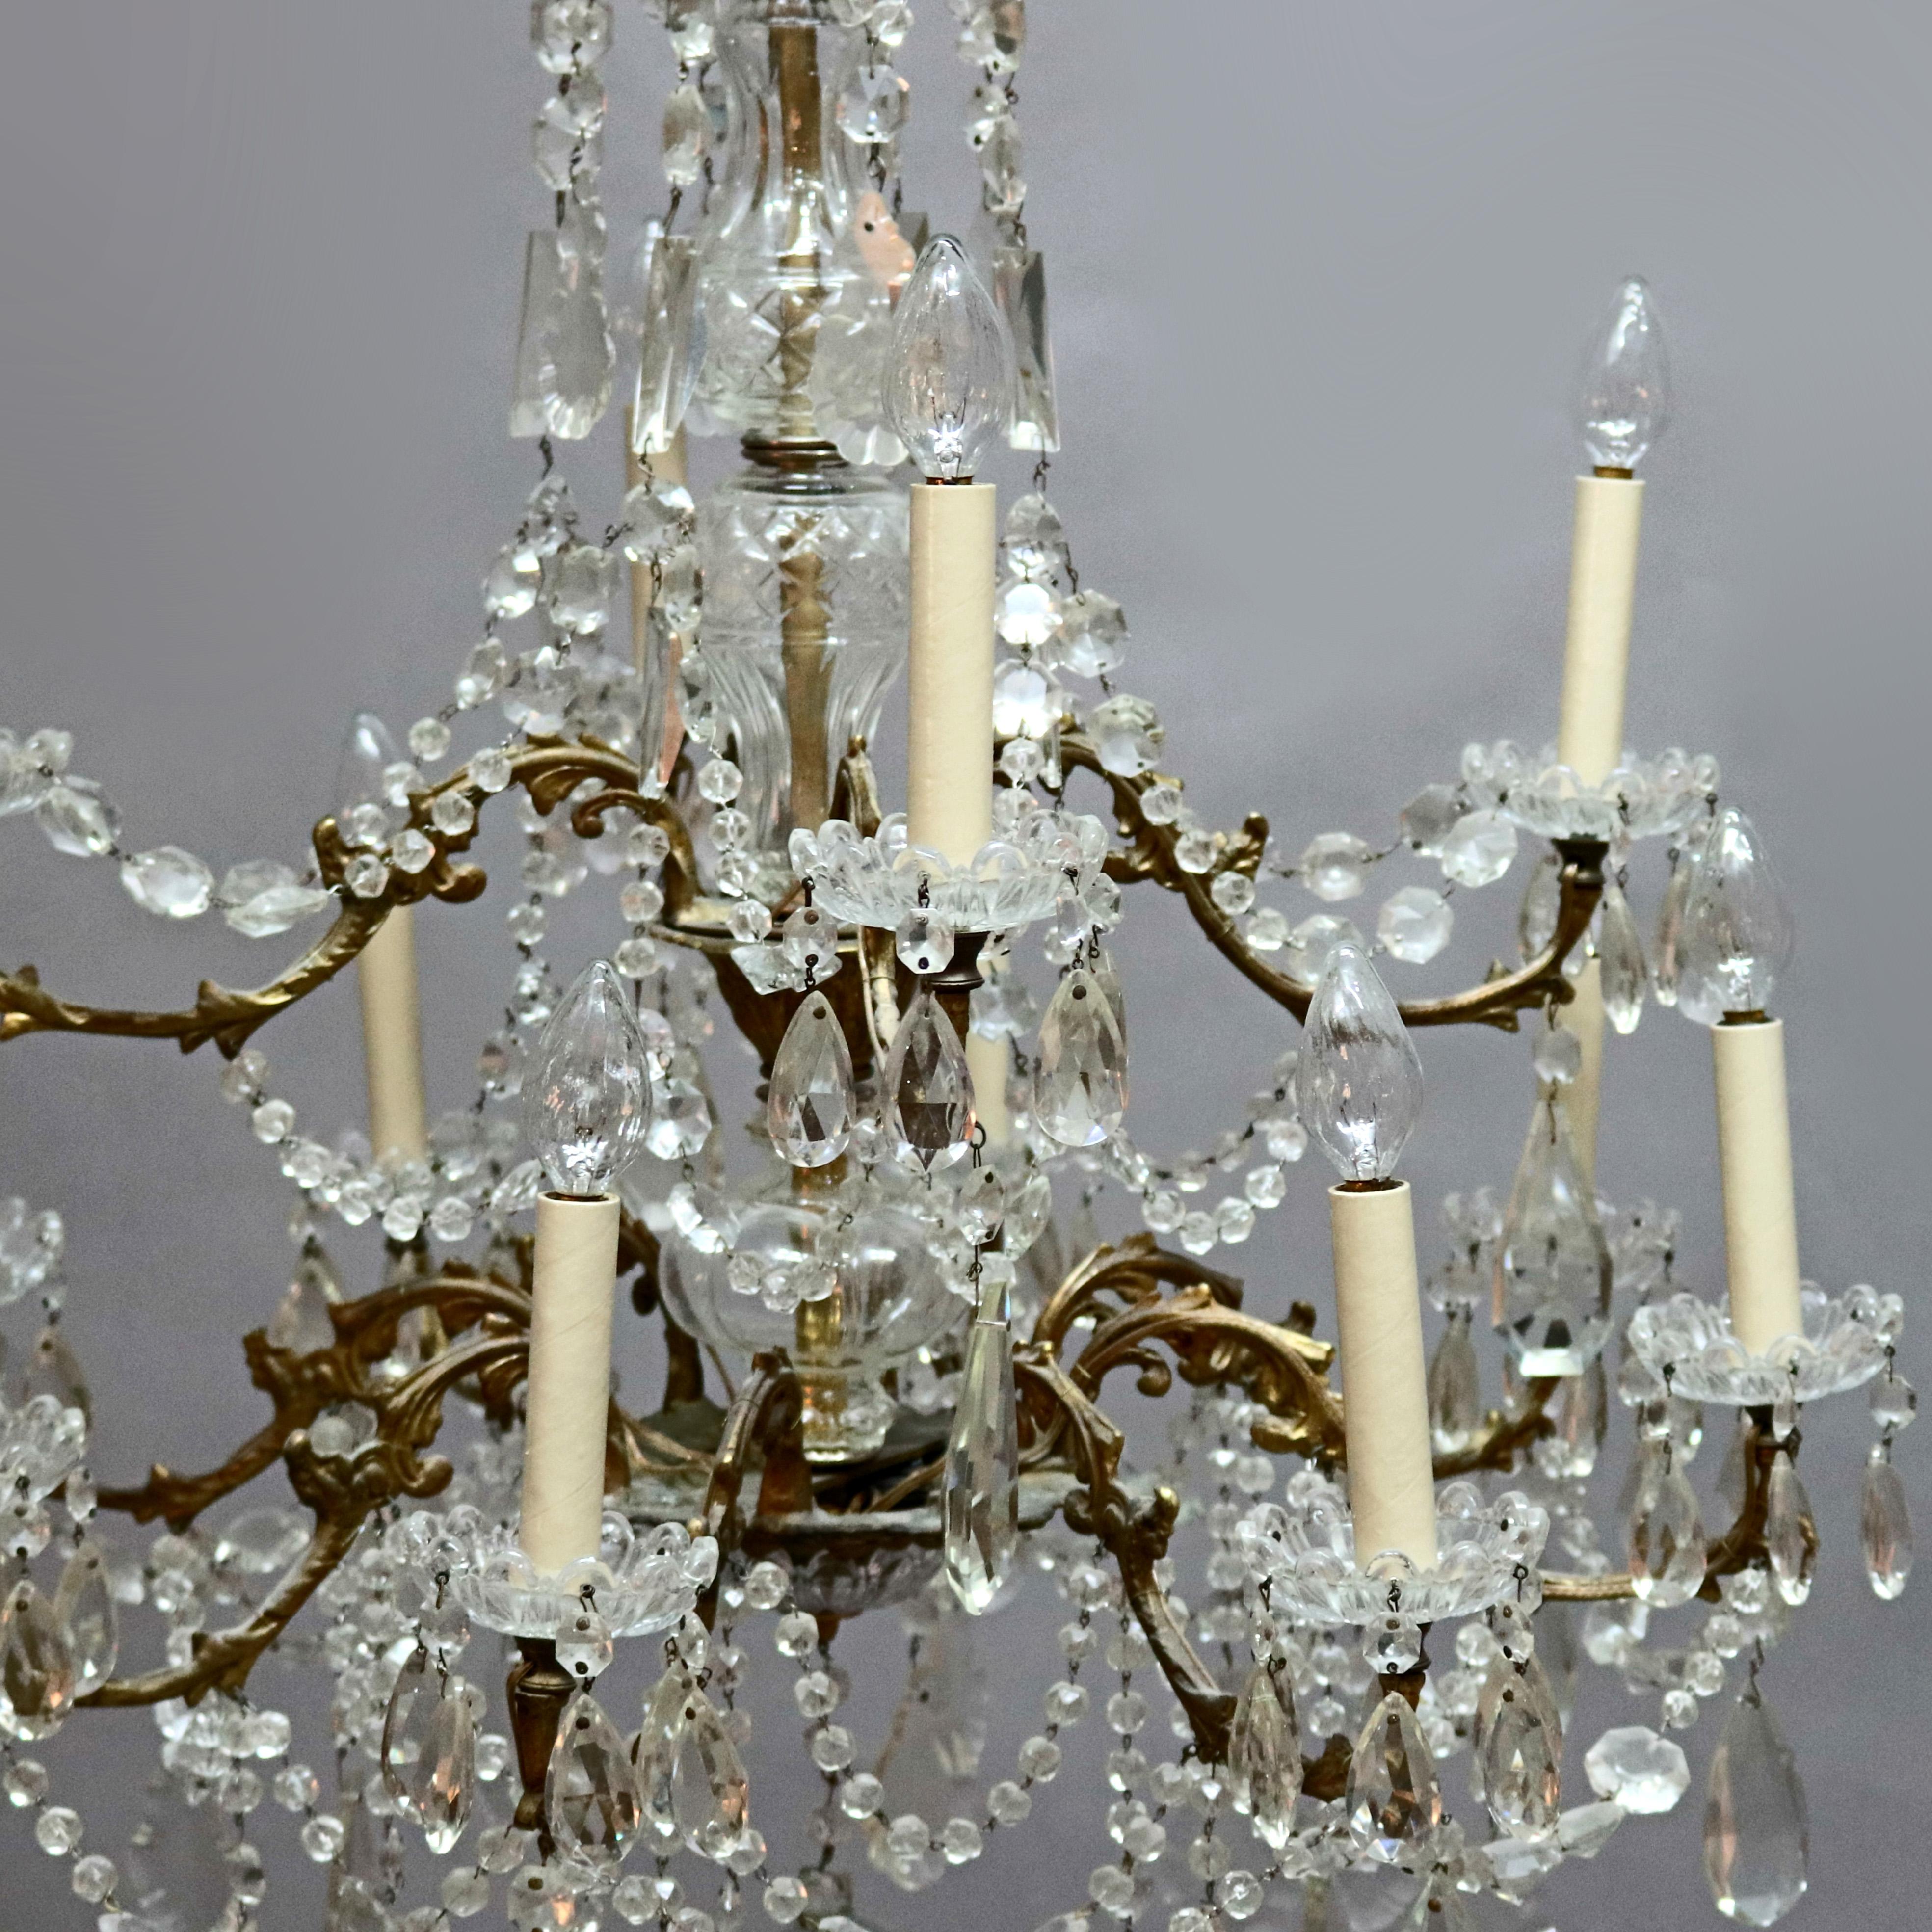 An antique French chandelier offers bronze frame in tiered form with twelve branch form arms terminating in candle lights, strung and drop cut crystals throughout, wired for US electricity, circa 1920

Measures: 36